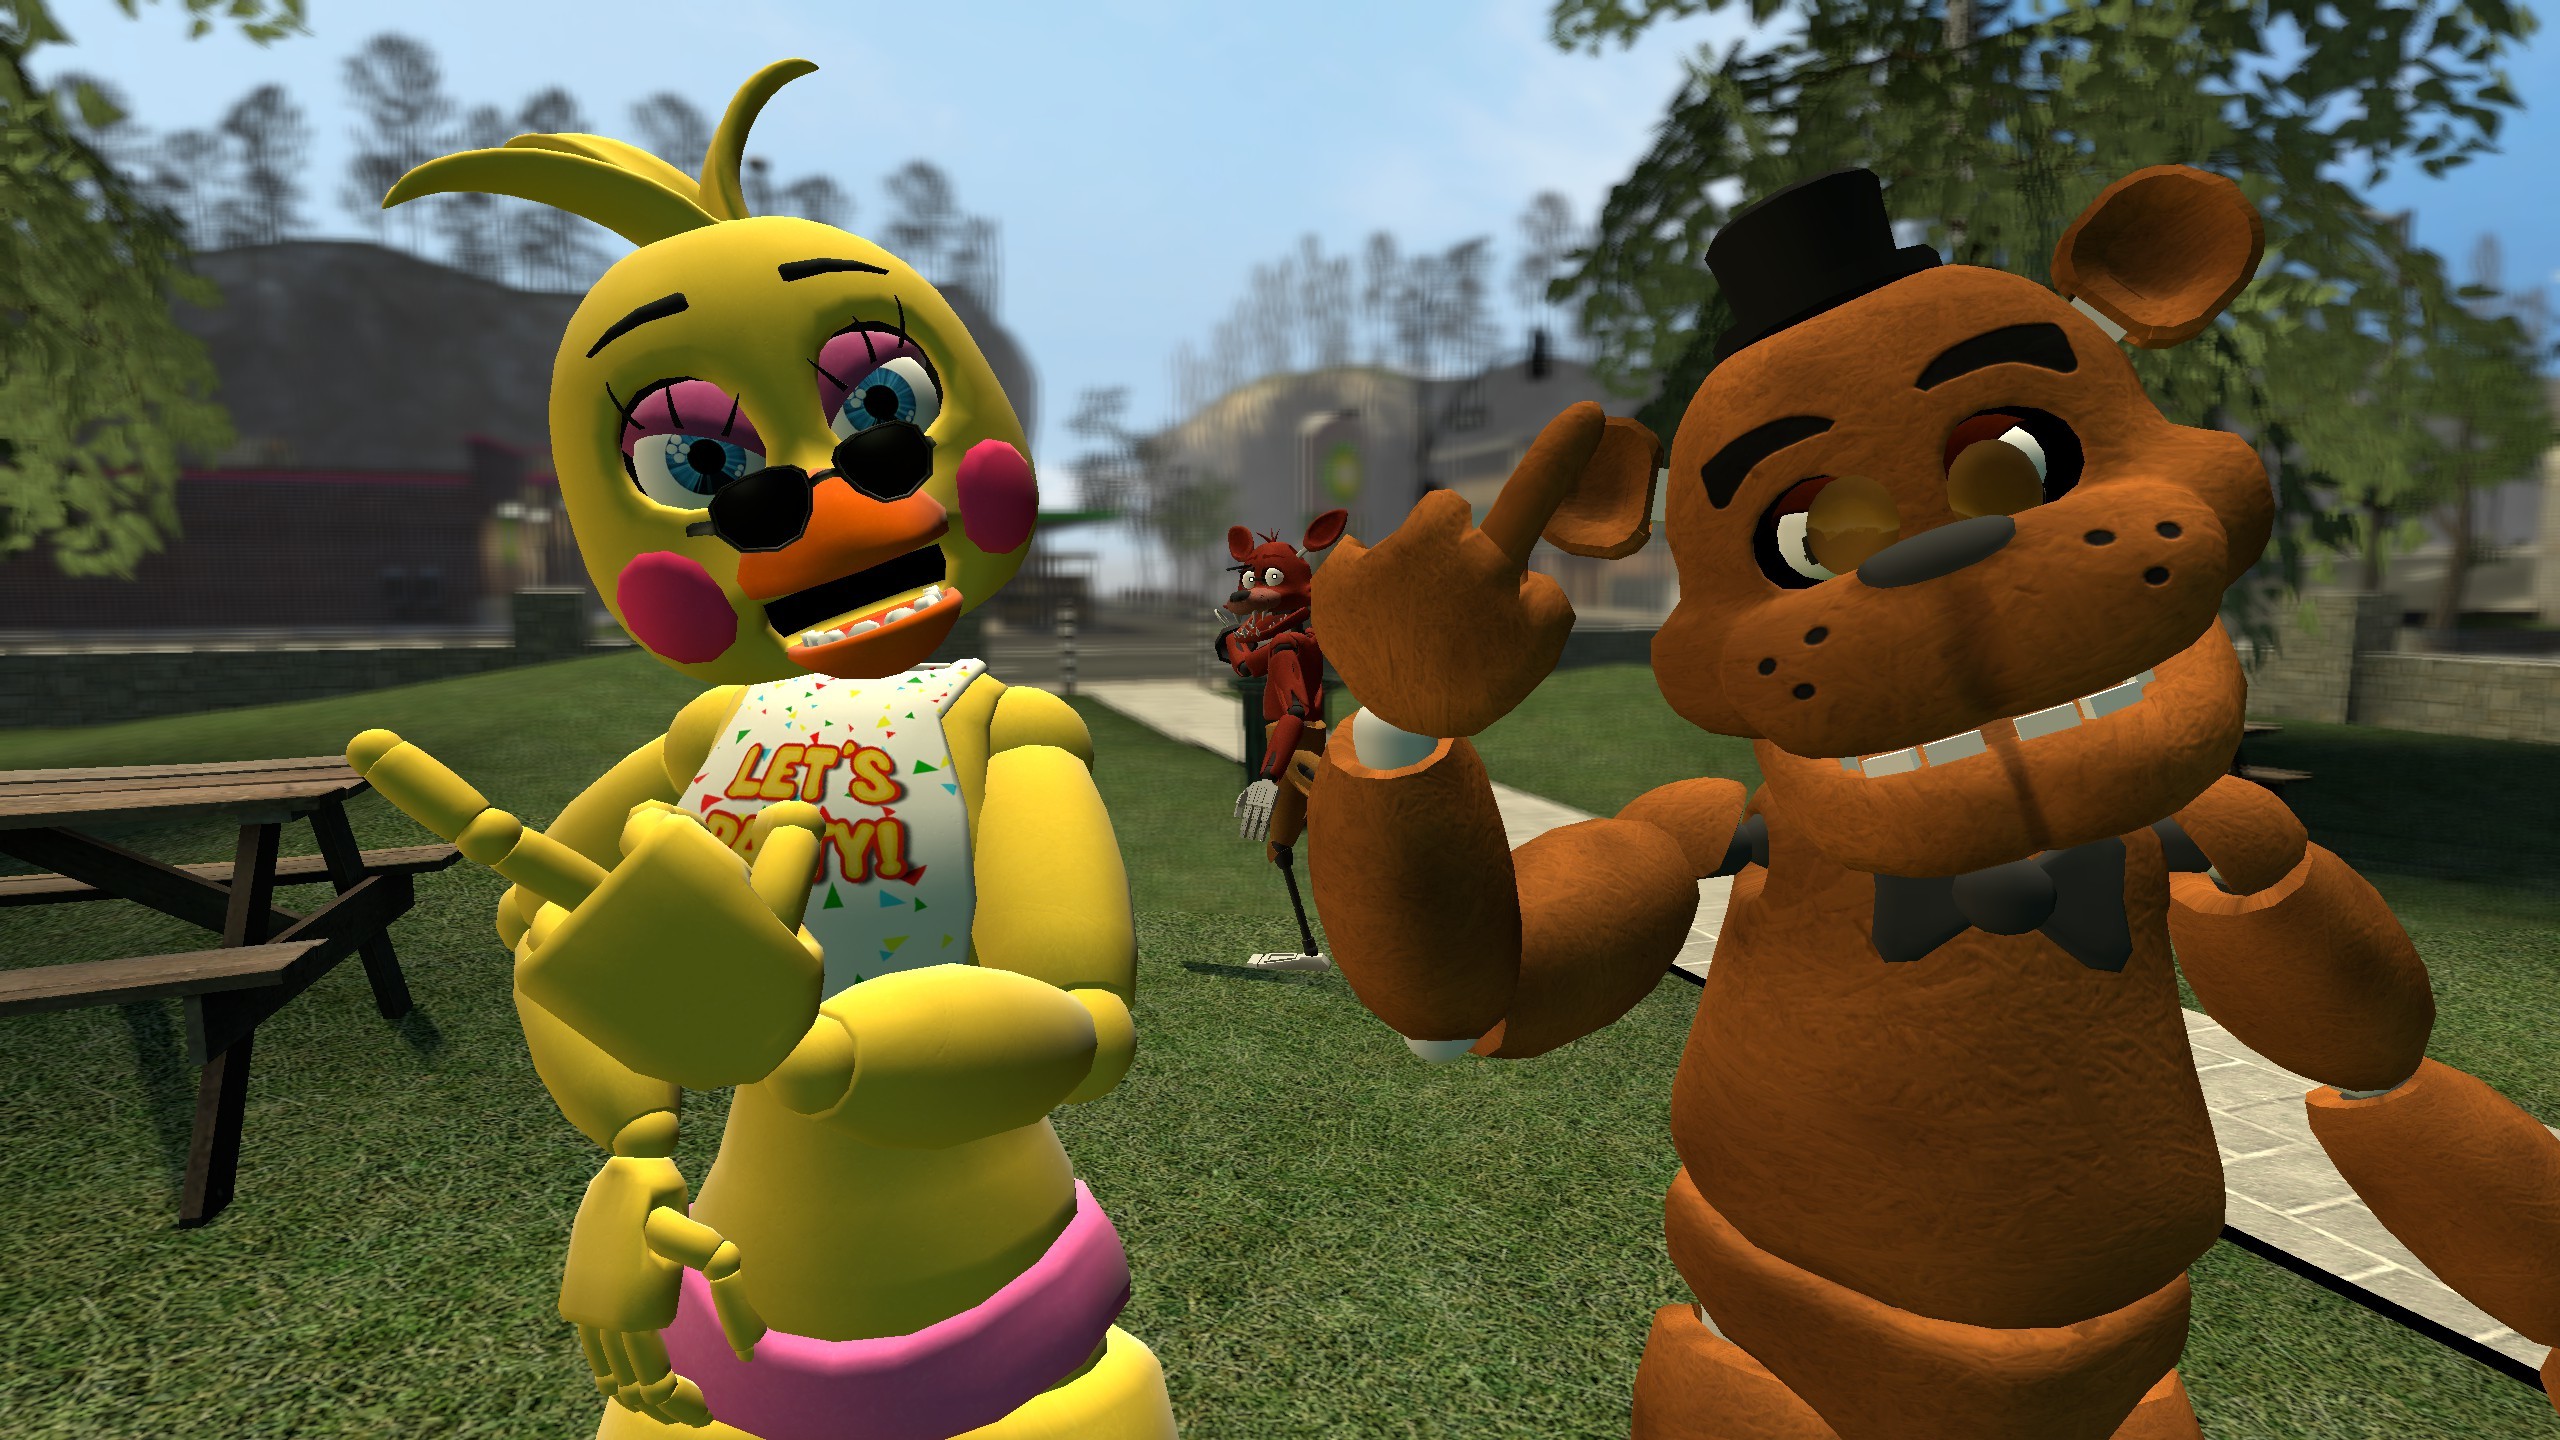 2560x1440 ... Therubyminecart Toy chica and freddy hate shit. by Therubyminecart